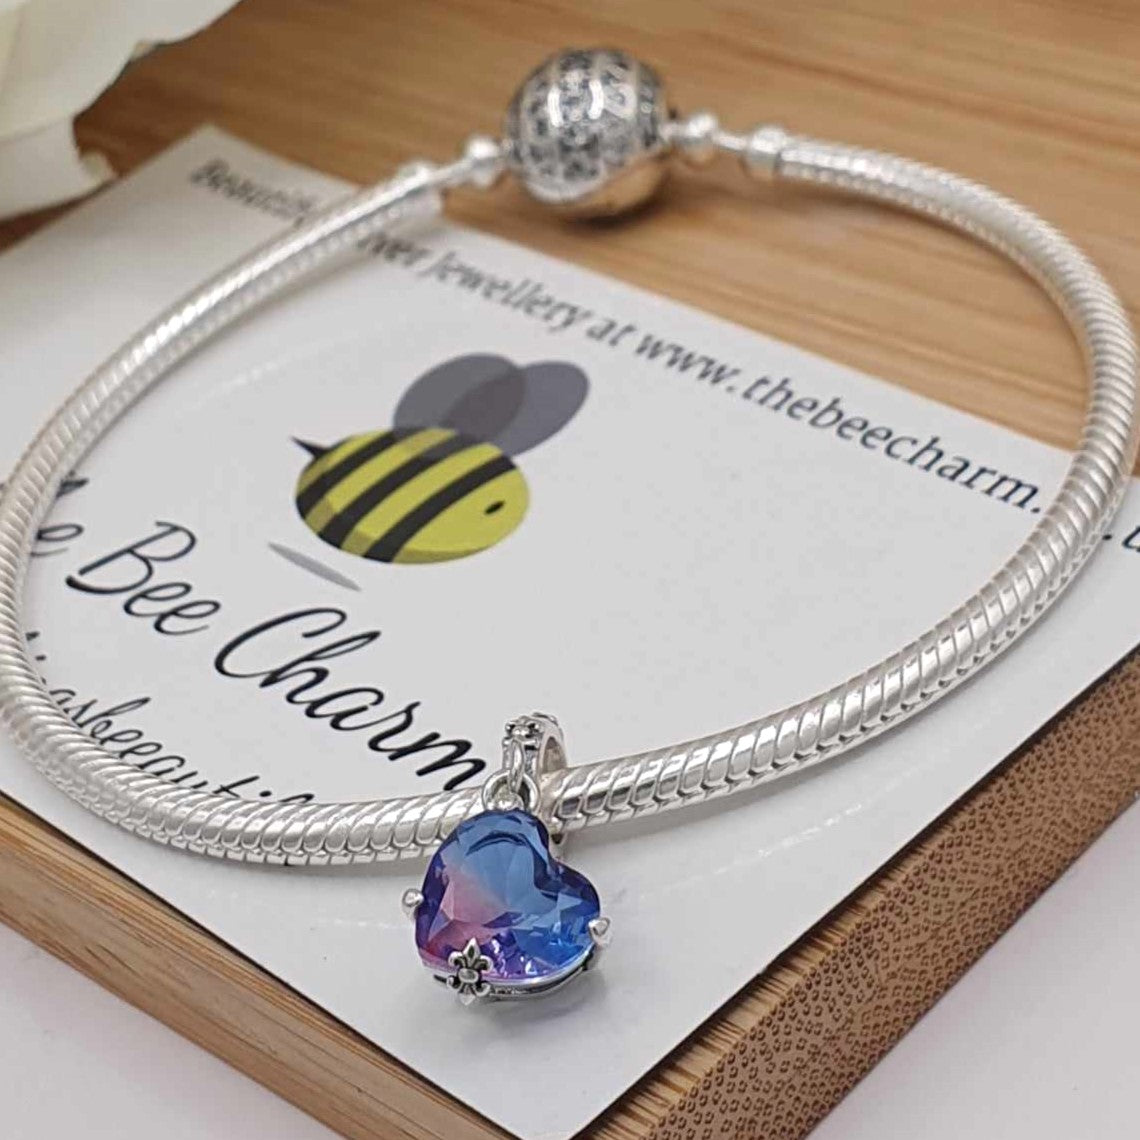 Ombre Purple Heart Charm- 925 Sterling Silver stamped & Cubic Zircons. This stunning charm features a large ombre purple heart shaped Zircon. The band is ornately decorated to match the clasps holding the heart or a necklace.